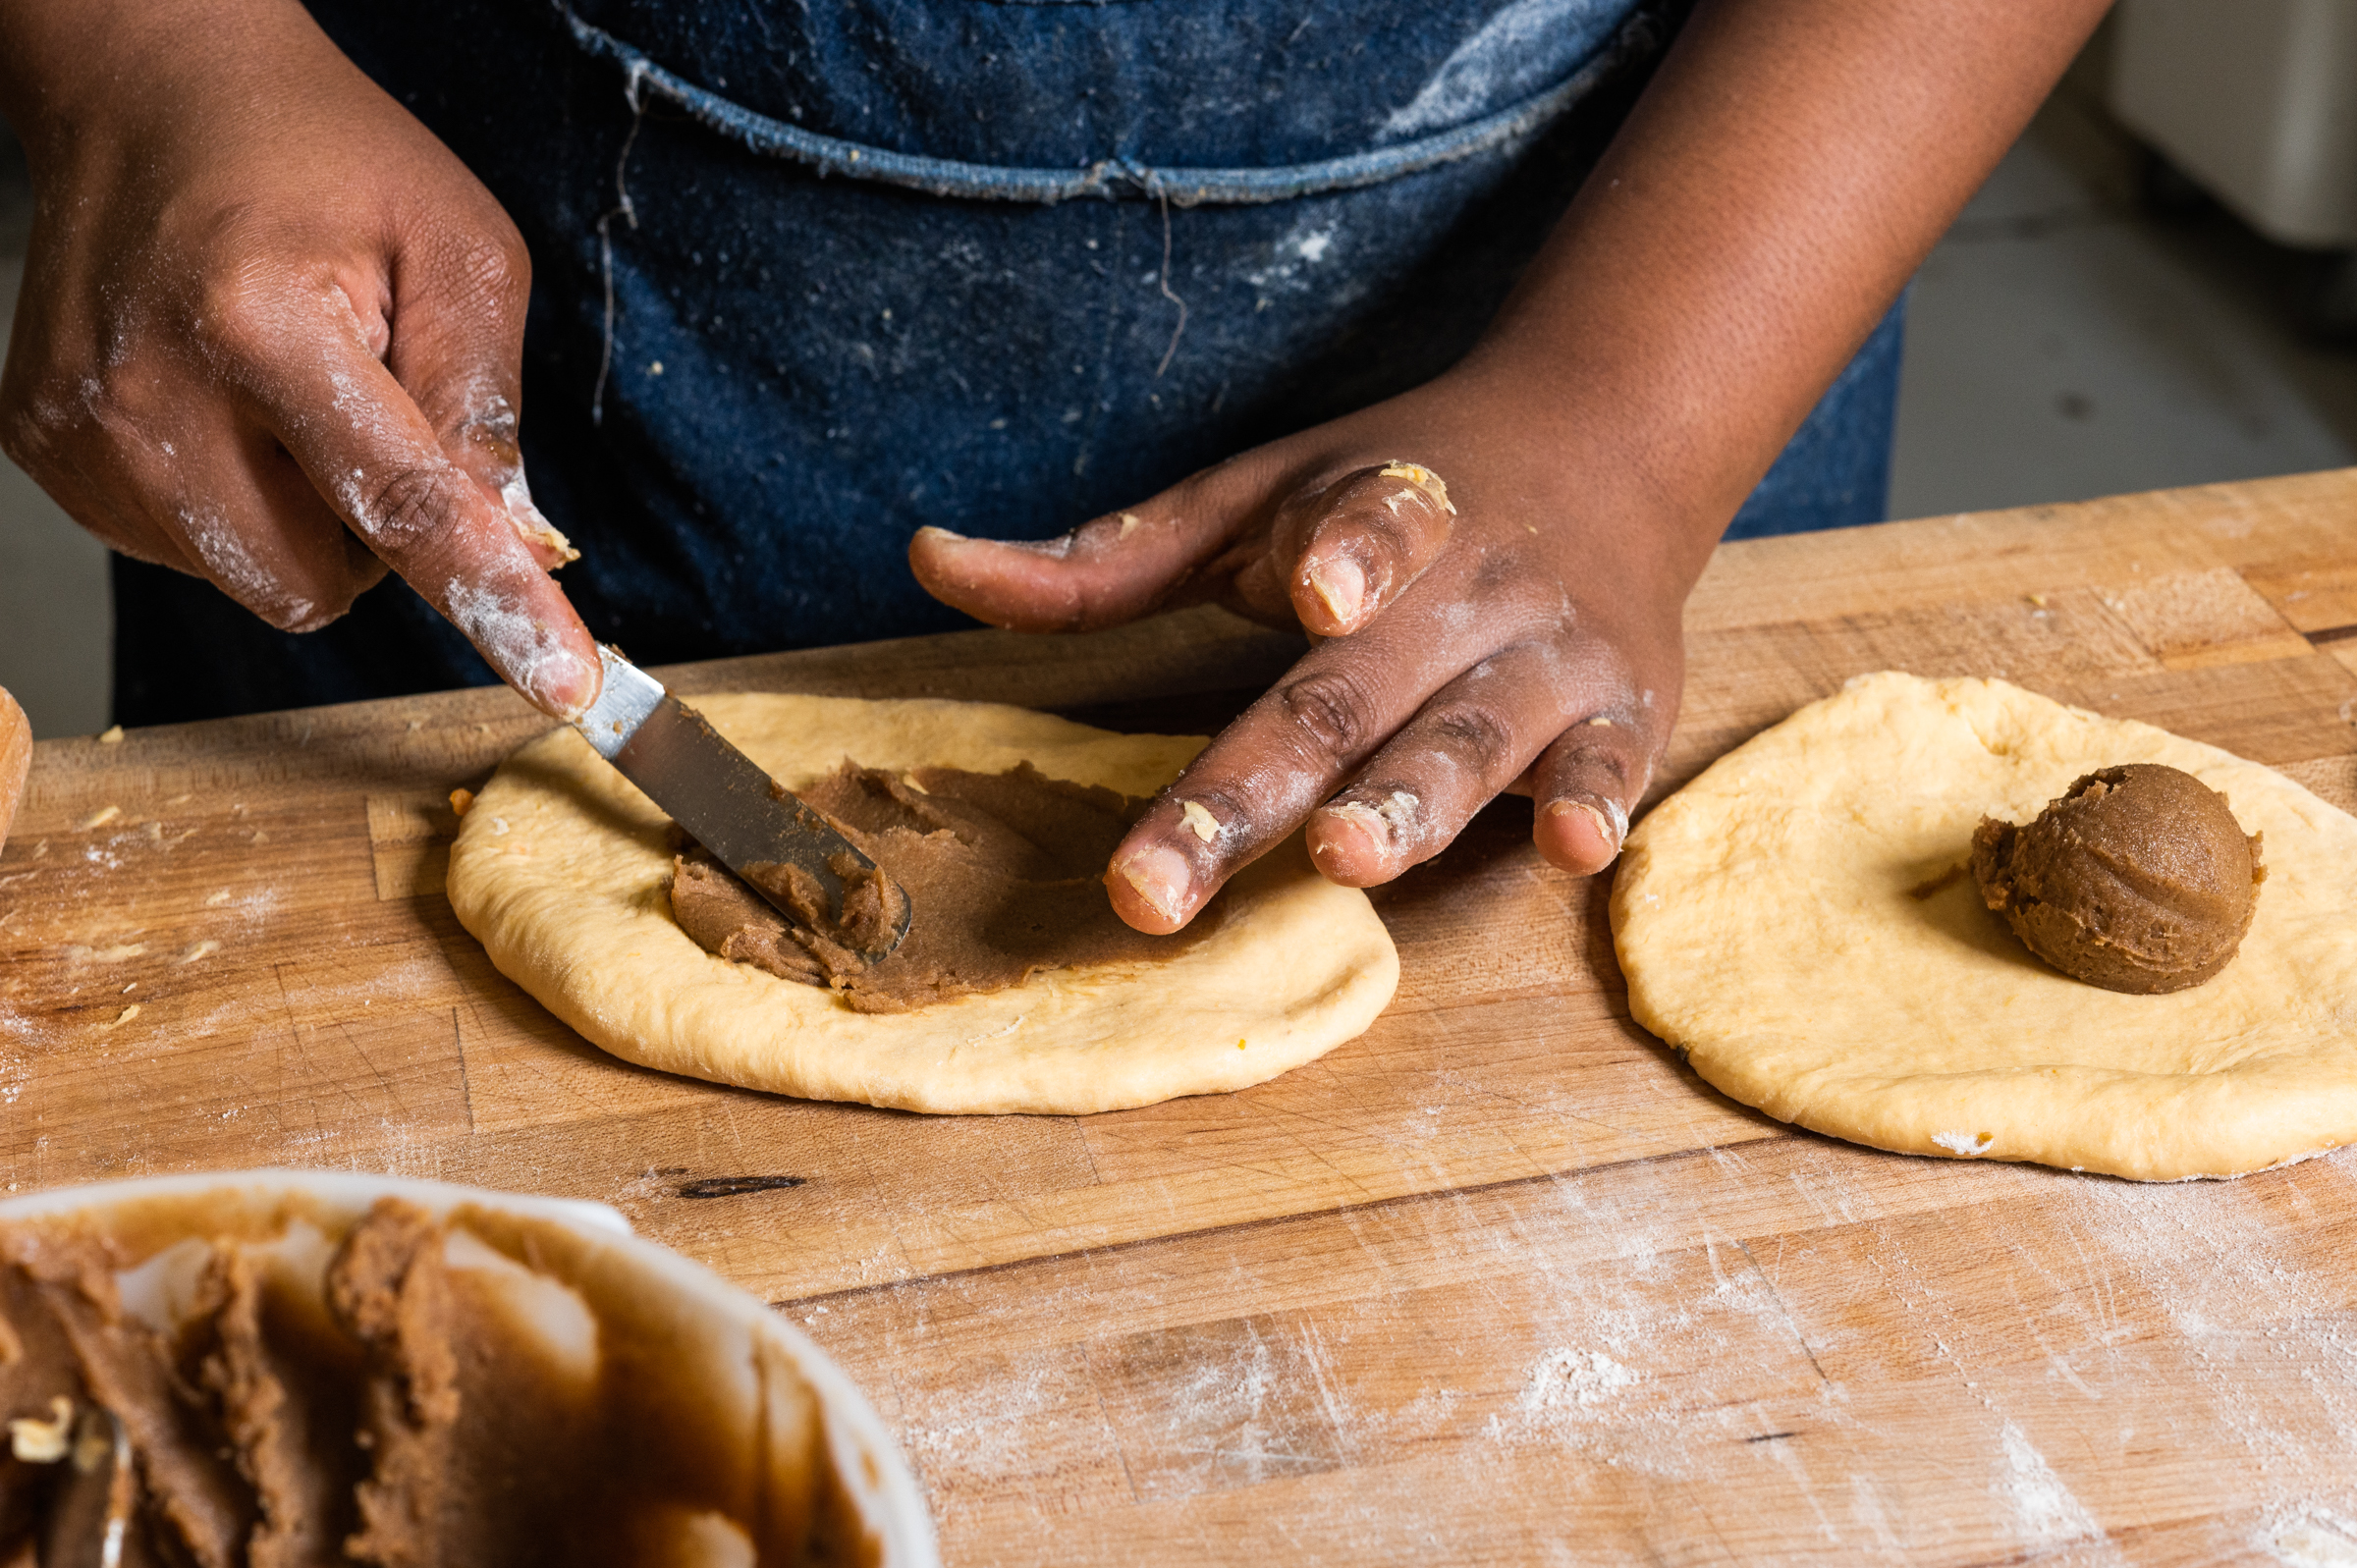 After proofing, the dough is rolled flat and filled with a mixture of brown sugar and spice